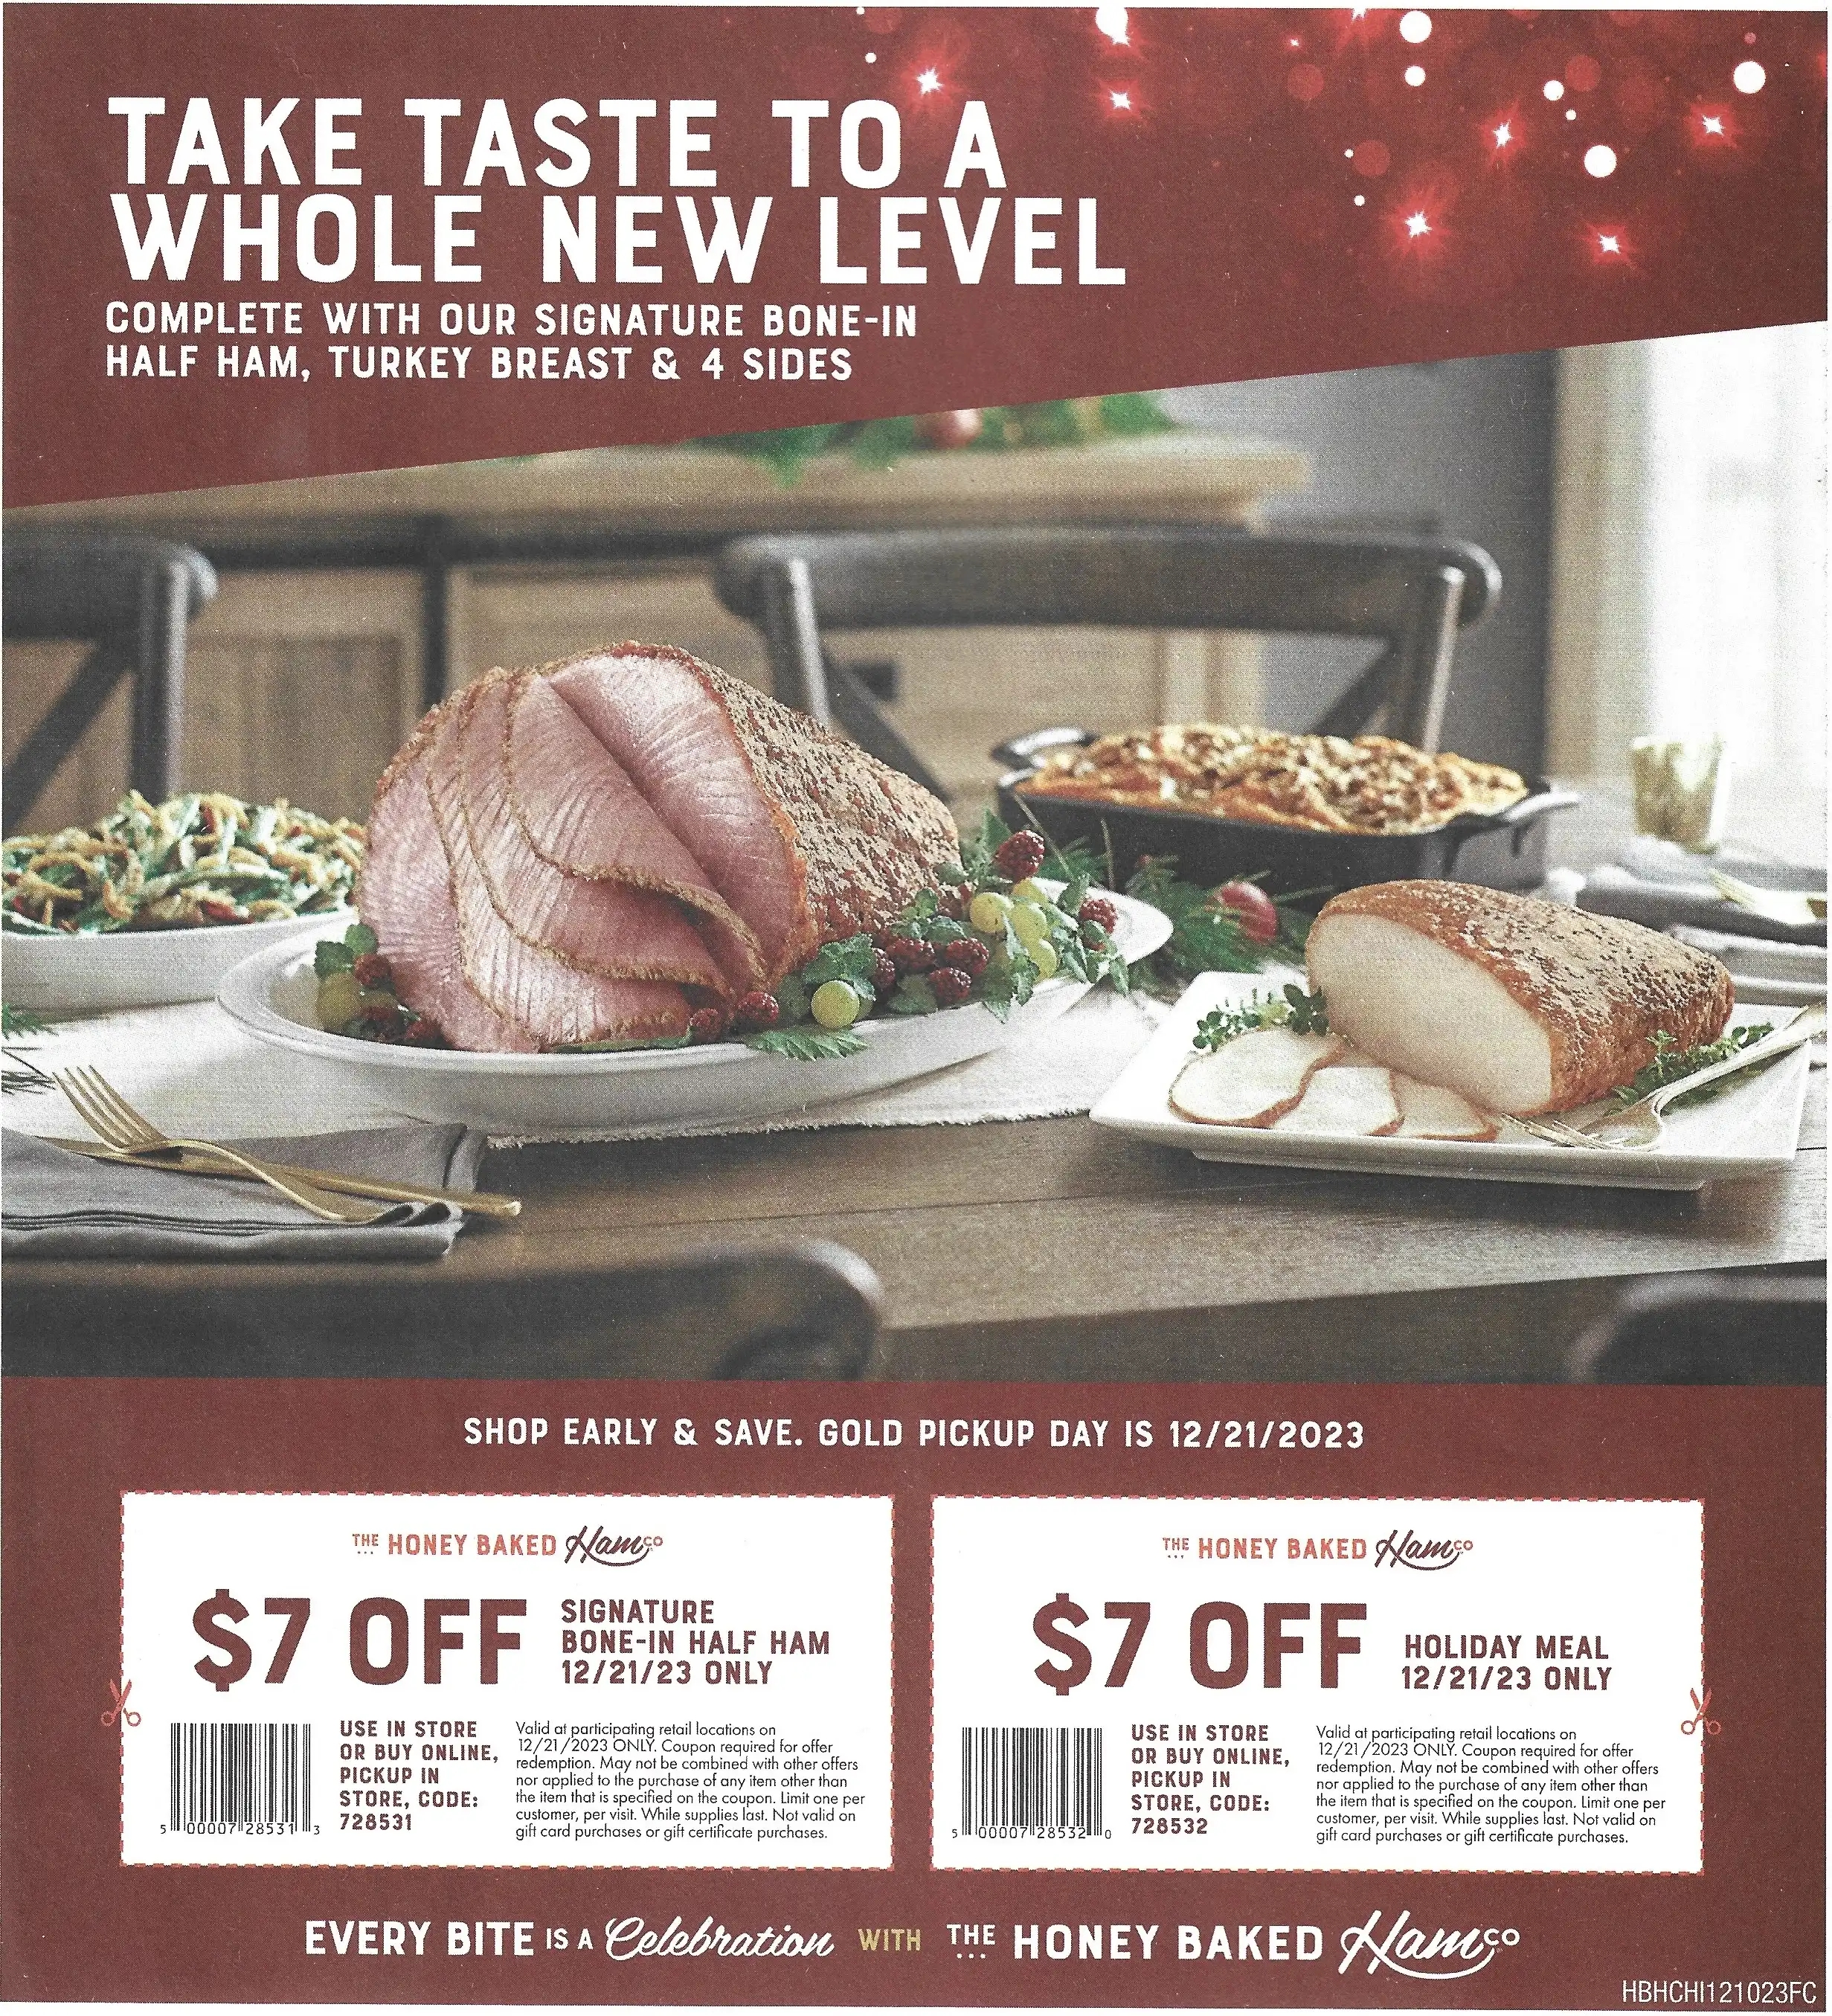 The Honey Baked Ham Company Coupons Printable - Expires 12/21/2023